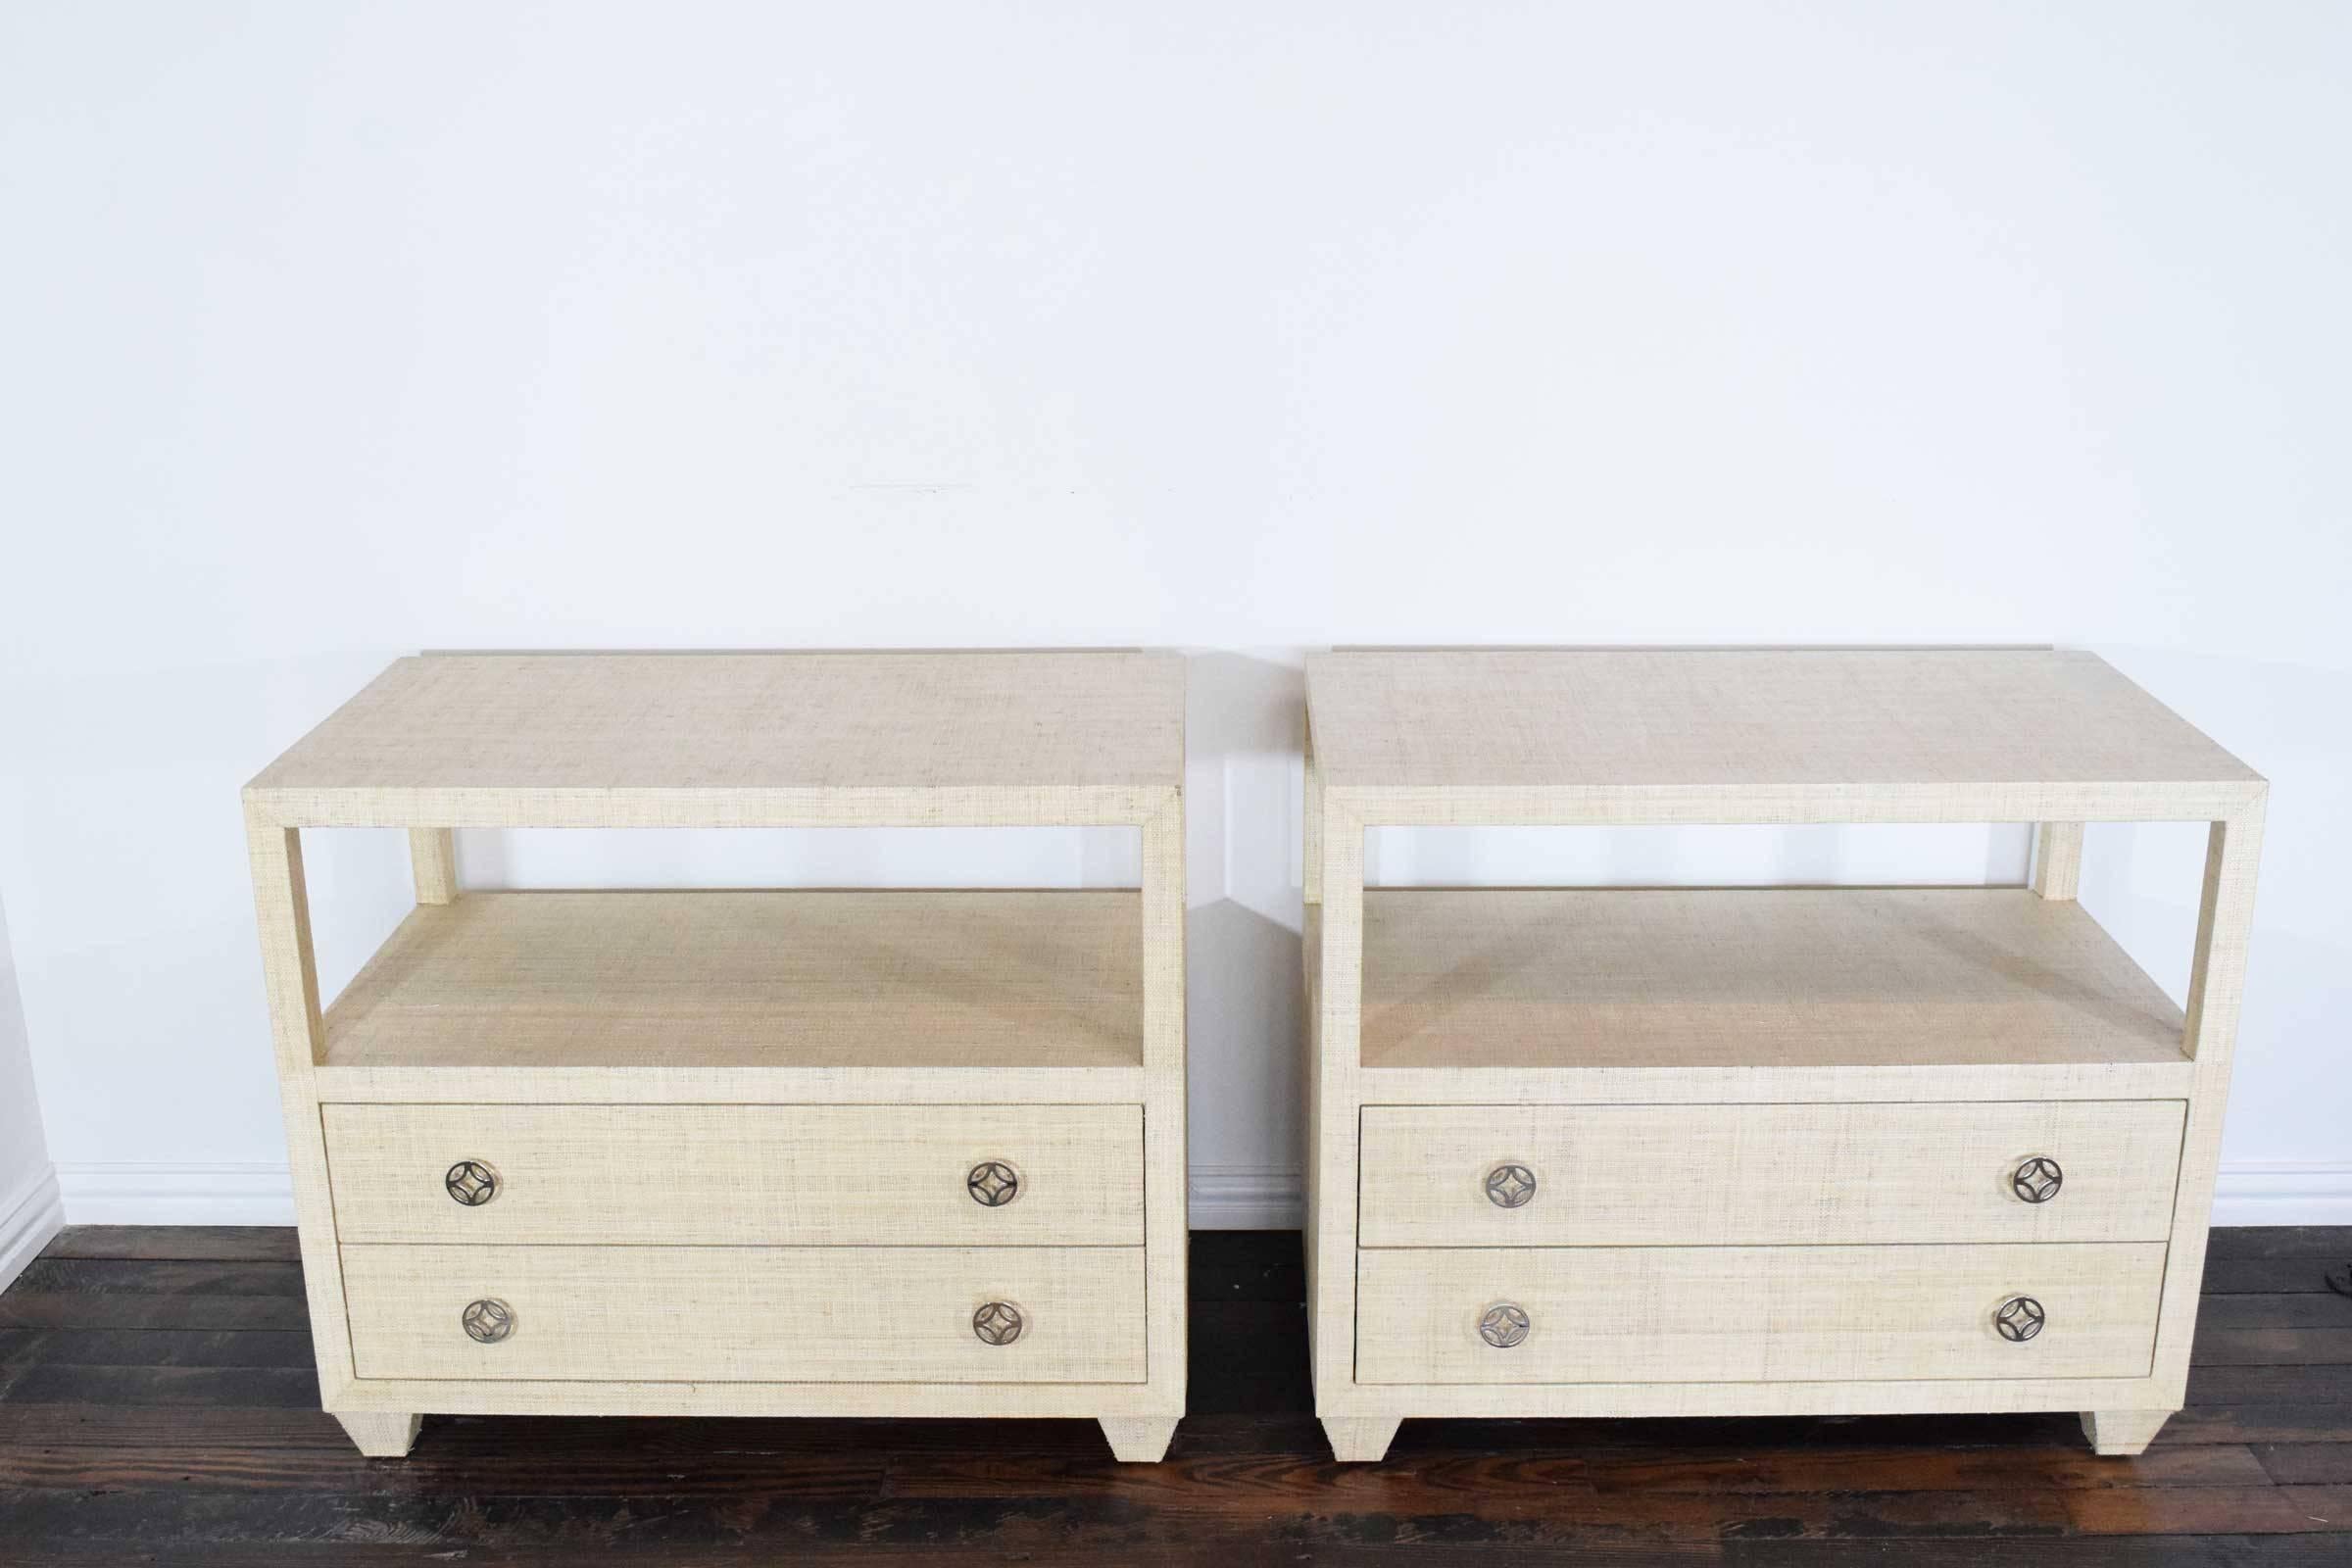 Beautiful condition, great pair of grasscloth nightstands by Bernhardt. Chrome knobs. Finished on the back. Just add a glass top to each to protect surface.